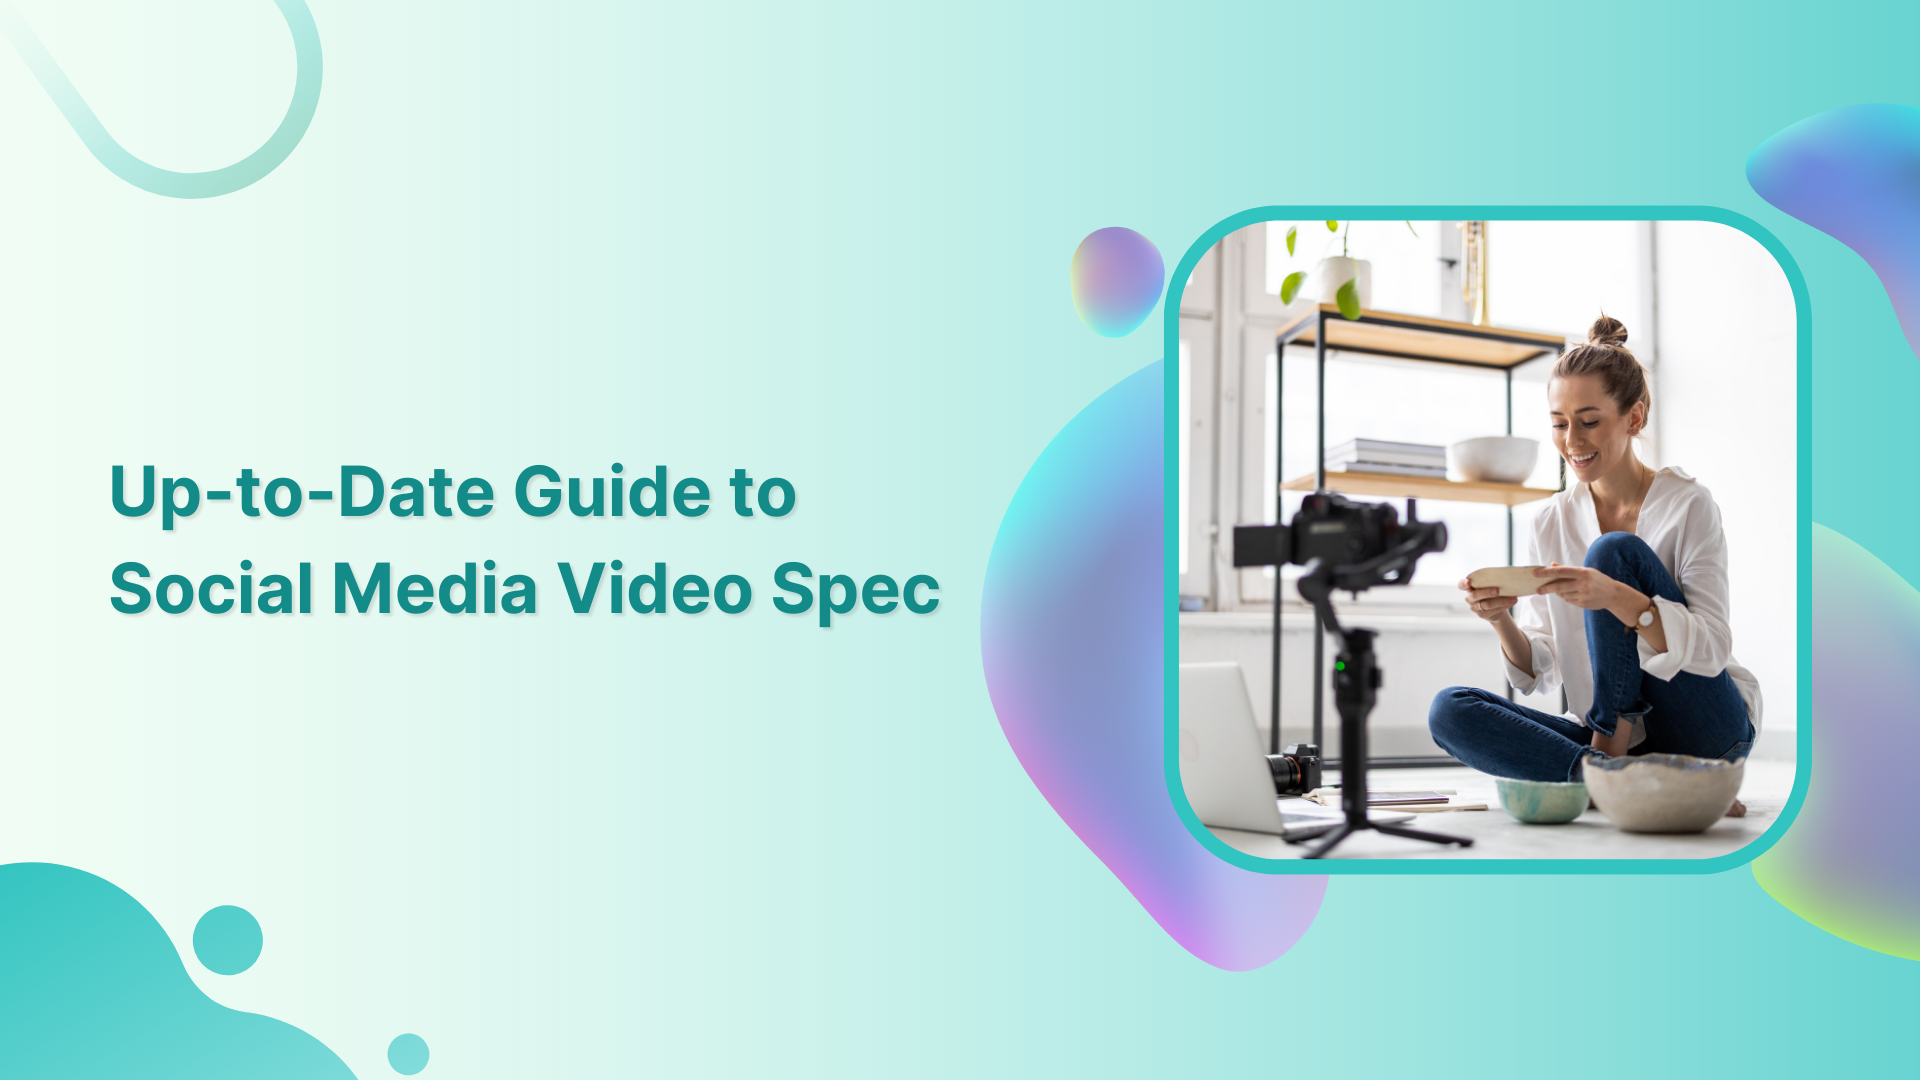 Up-to-Date Guide to Social Media Video Spec